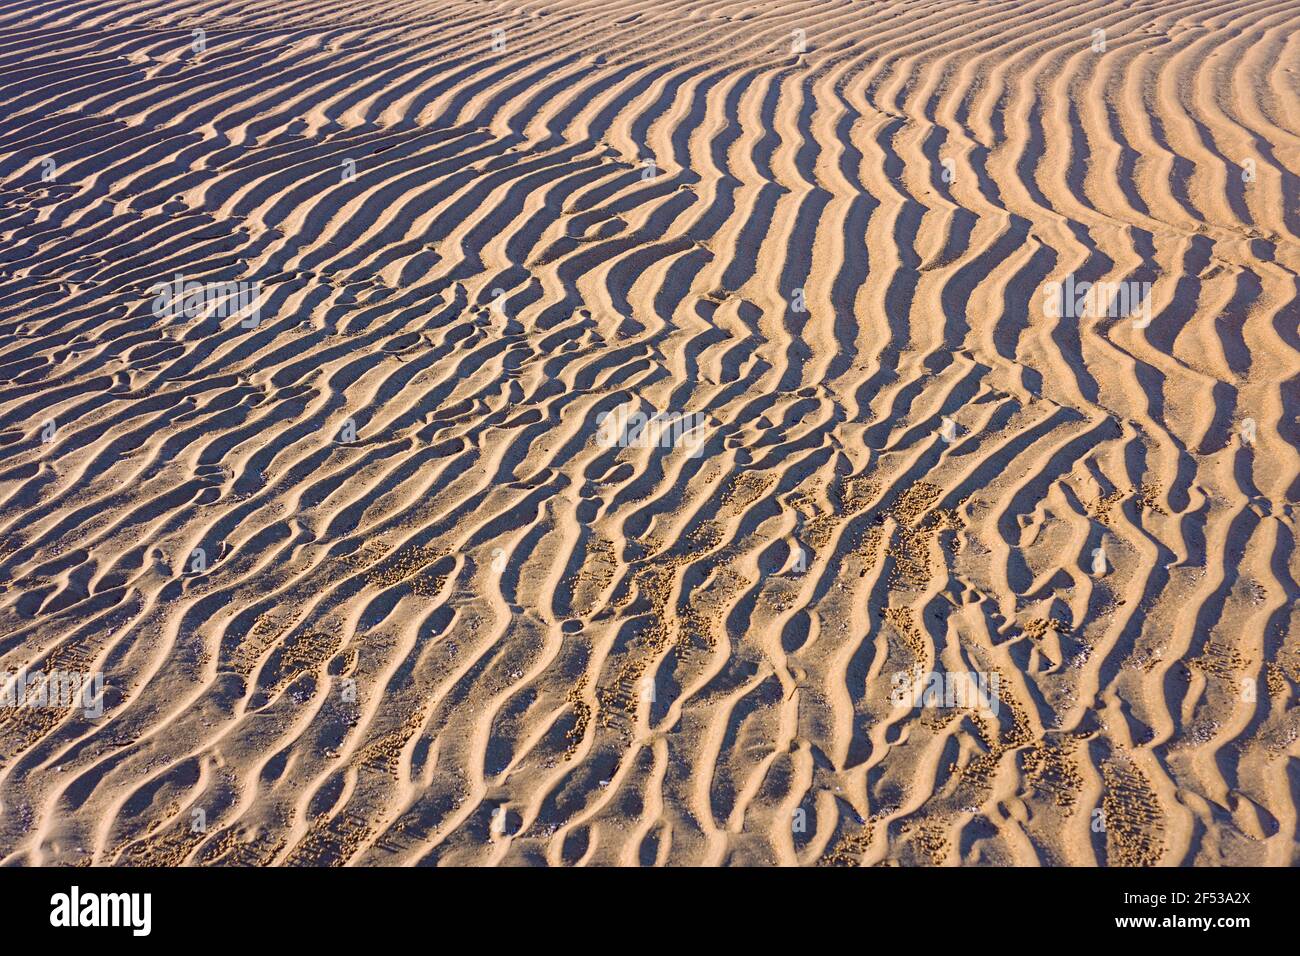 Regular ripples and patterns left on a sandy golden beach in the tropics made by the waves and the receding tide. Stock Photo